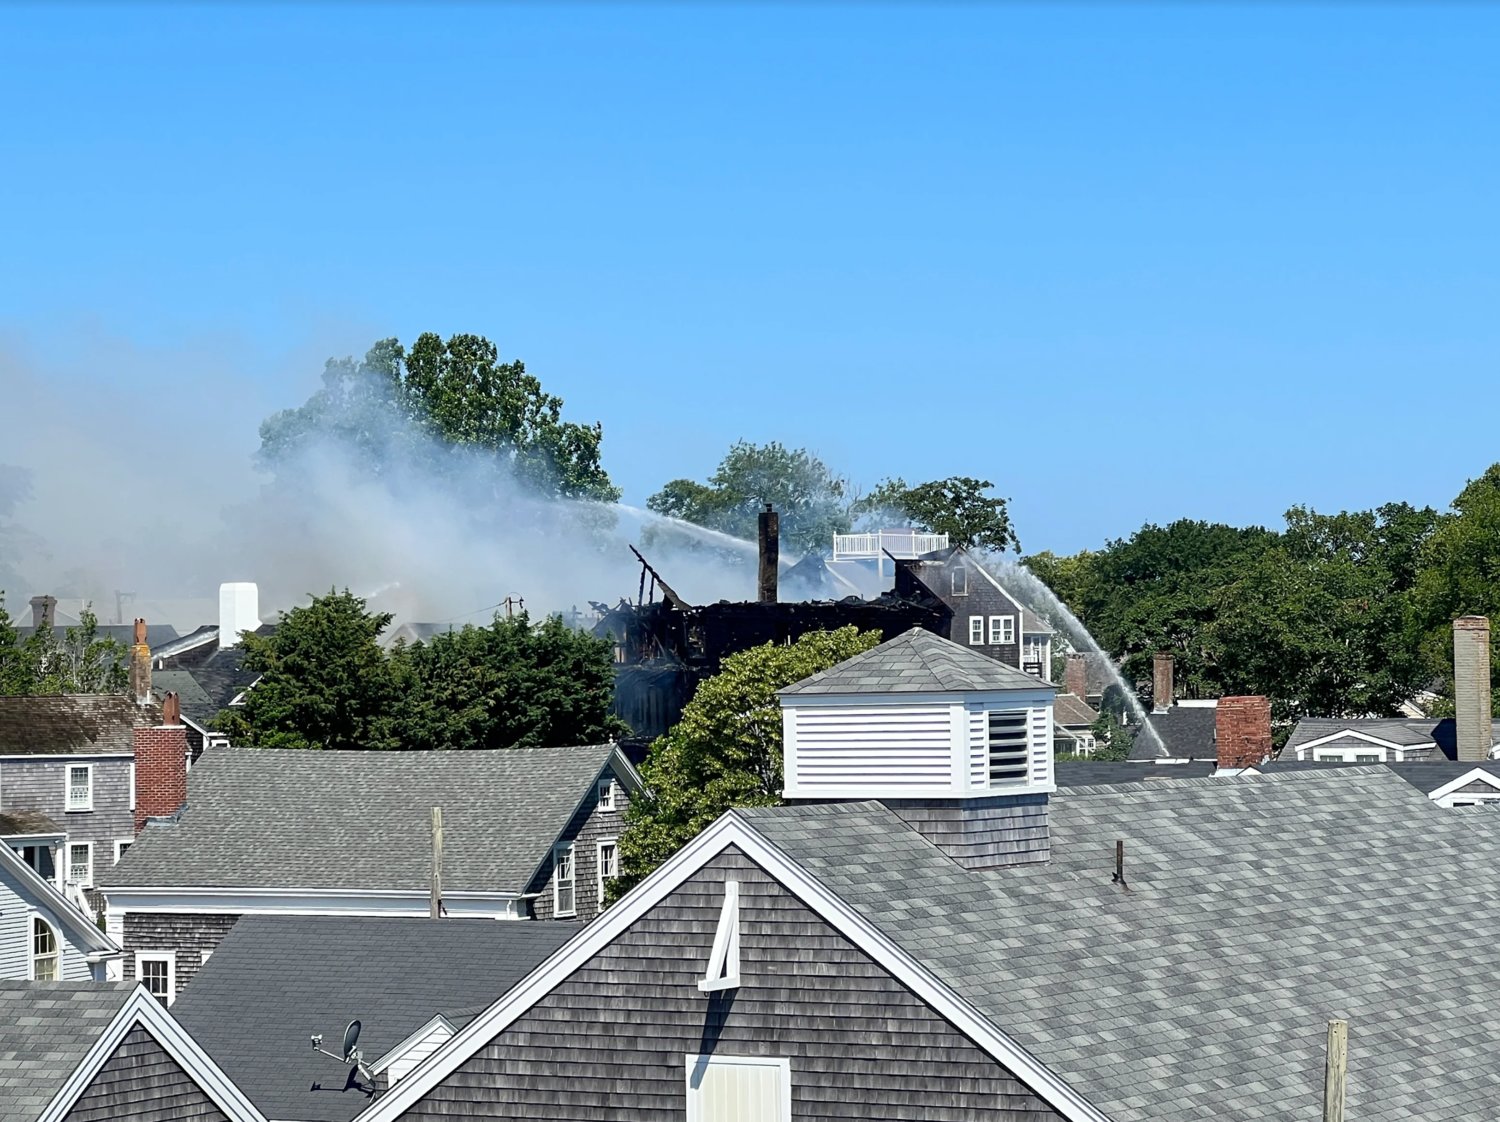 A view of the charred roof of the Veranda House from the roof deck of the Nantucket Whaling Museum.